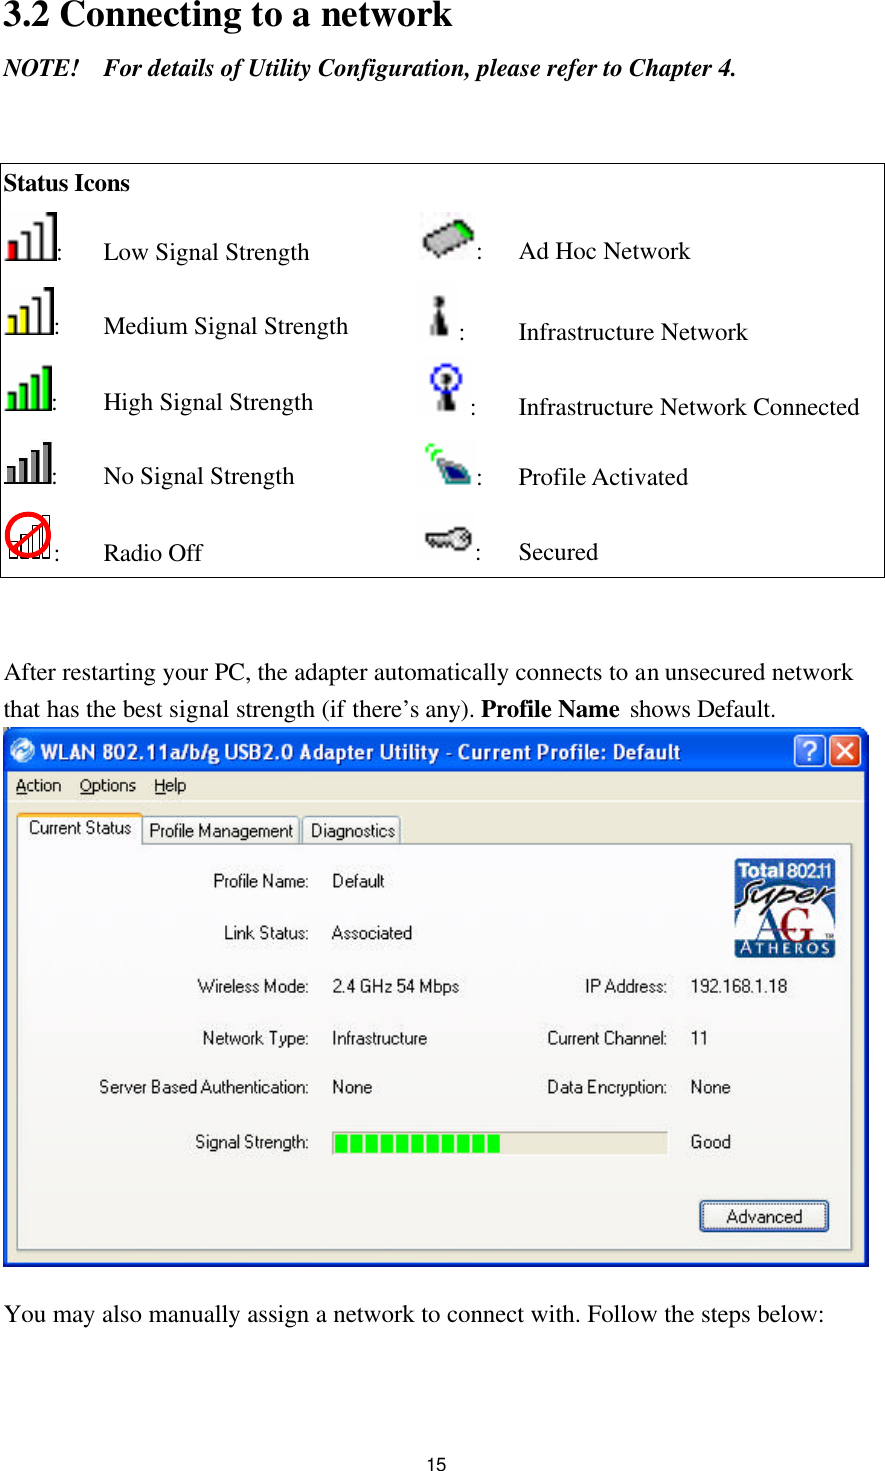 15 3.2 Connecting to a network NOTE! For details of Utility Configuration, please refer to Chapter 4.   Status Icons  : Low Signal Strength  : Ad Hoc Network : Medium Signal Strength :   Infrastructure Network : High Signal Strength : Infrastructure Network Connected : No Signal Strength : Profile Activated : Radio Off : Secured   After restarting your PC, the adapter automatically connects to an unsecured network that has the best signal strength (if there’s any). Profile Name shows Default.   You may also manually assign a network to connect with. Follow the steps below:  